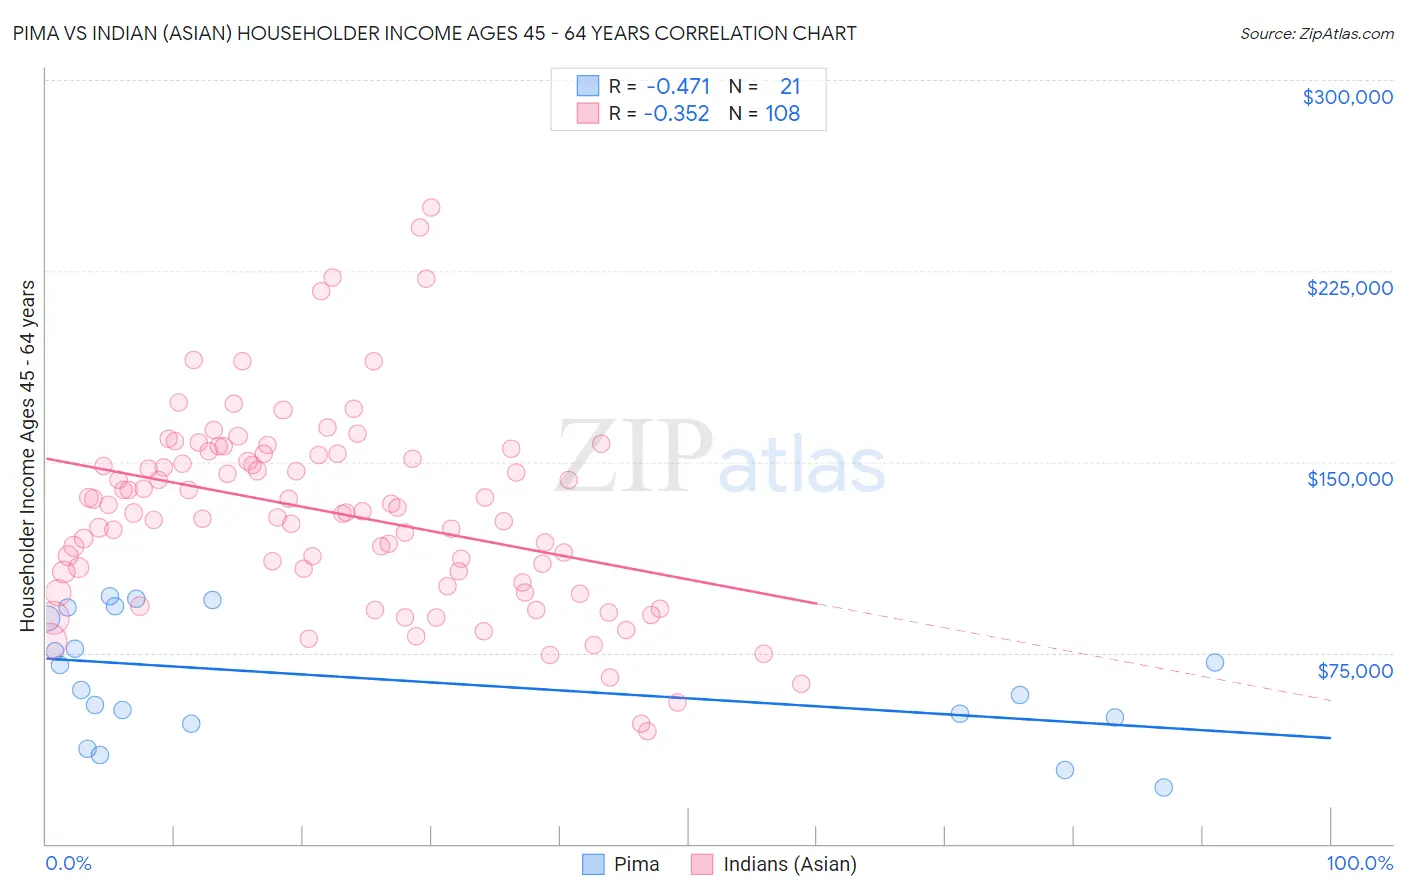 Pima vs Indian (Asian) Householder Income Ages 45 - 64 years